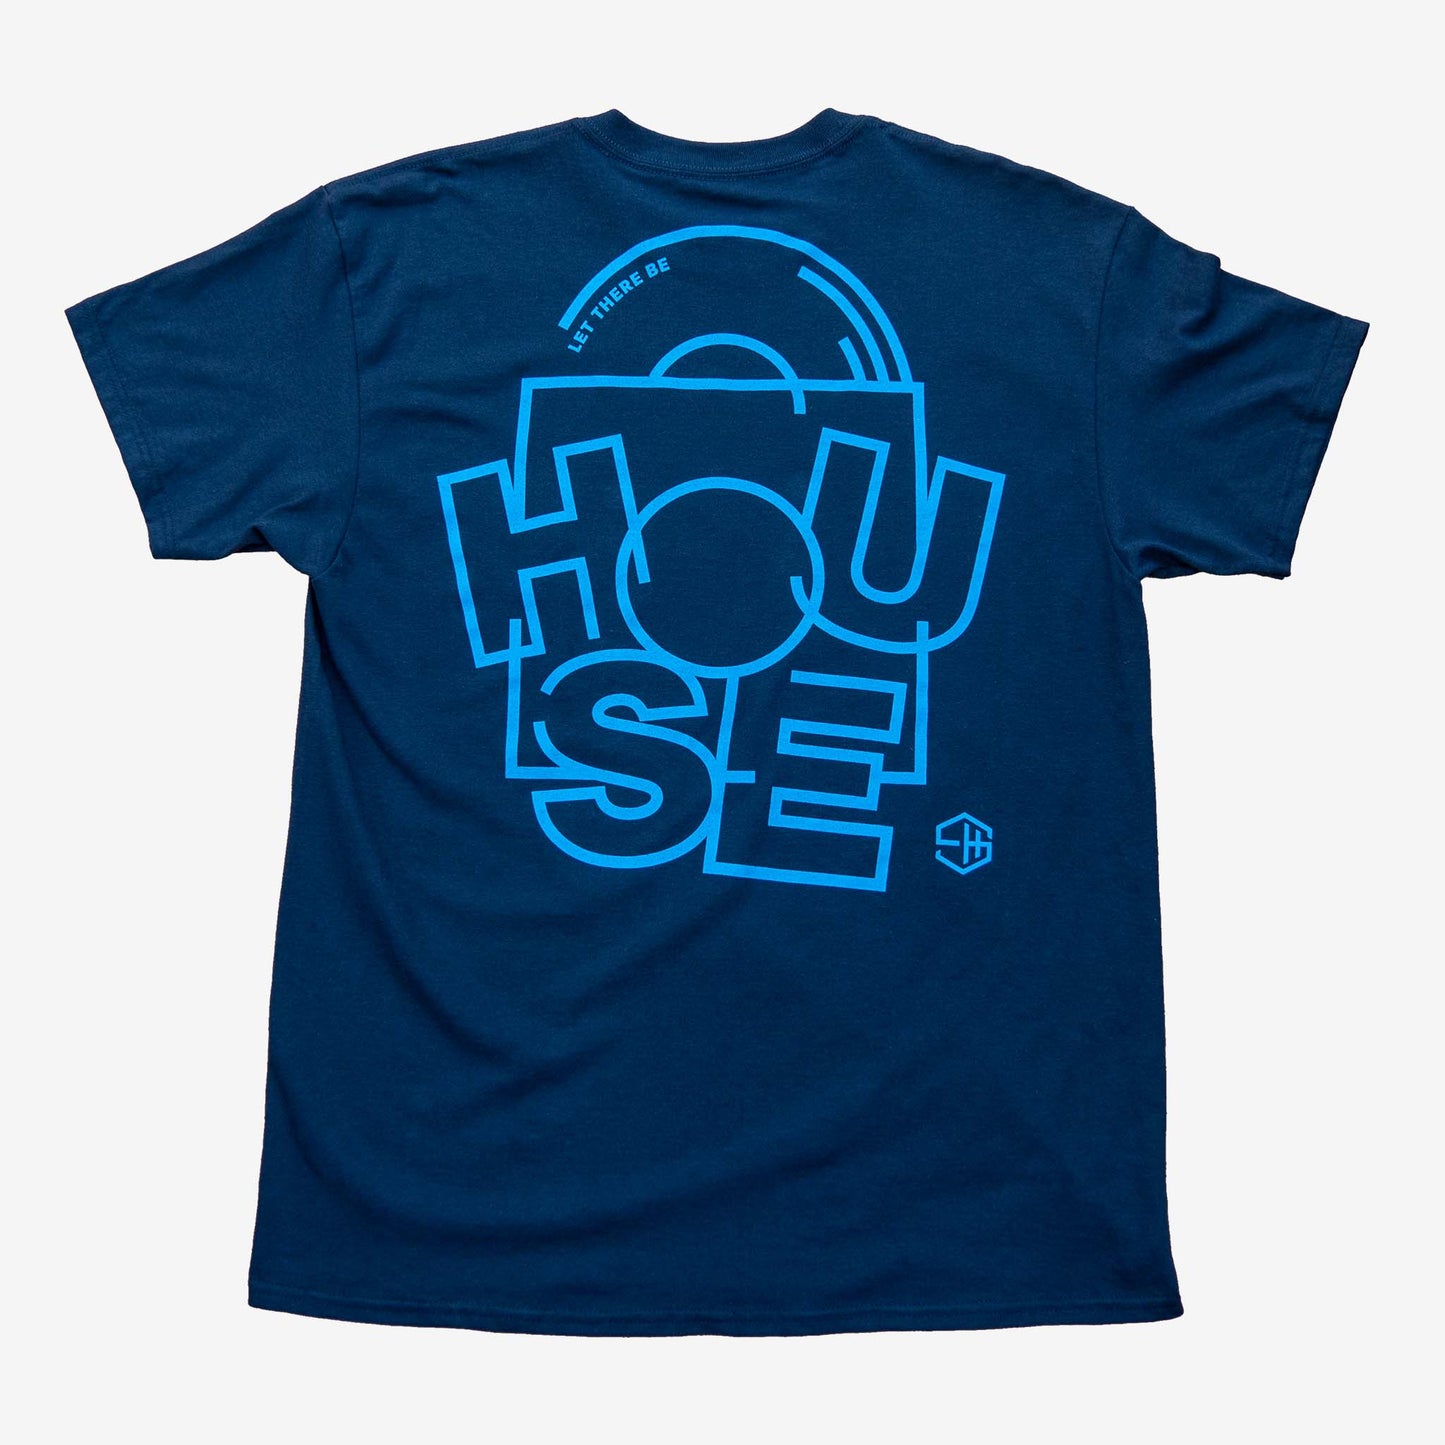 Let there be house music t-shirt navy back print